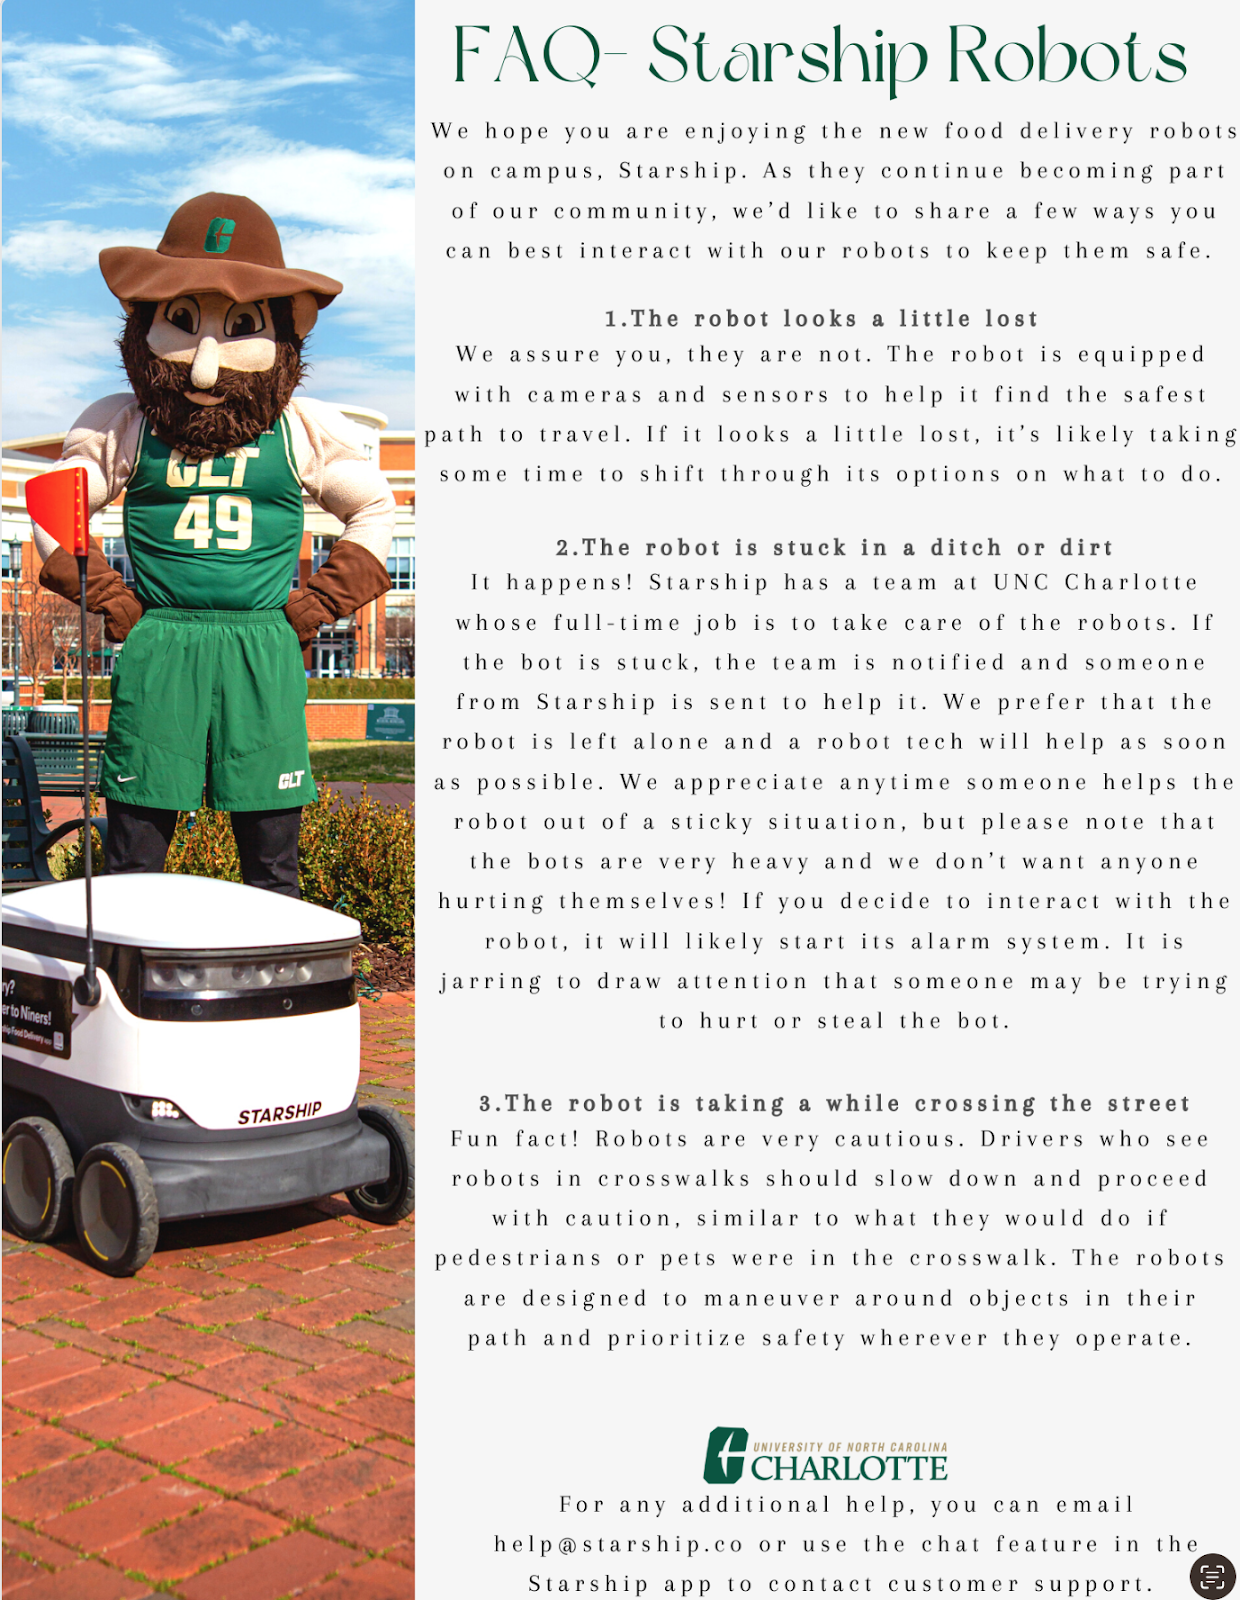 A FAQ put together by the university that explains why the robots sometimes have trouble crossing the street and features the UNC Charlotte mascot.